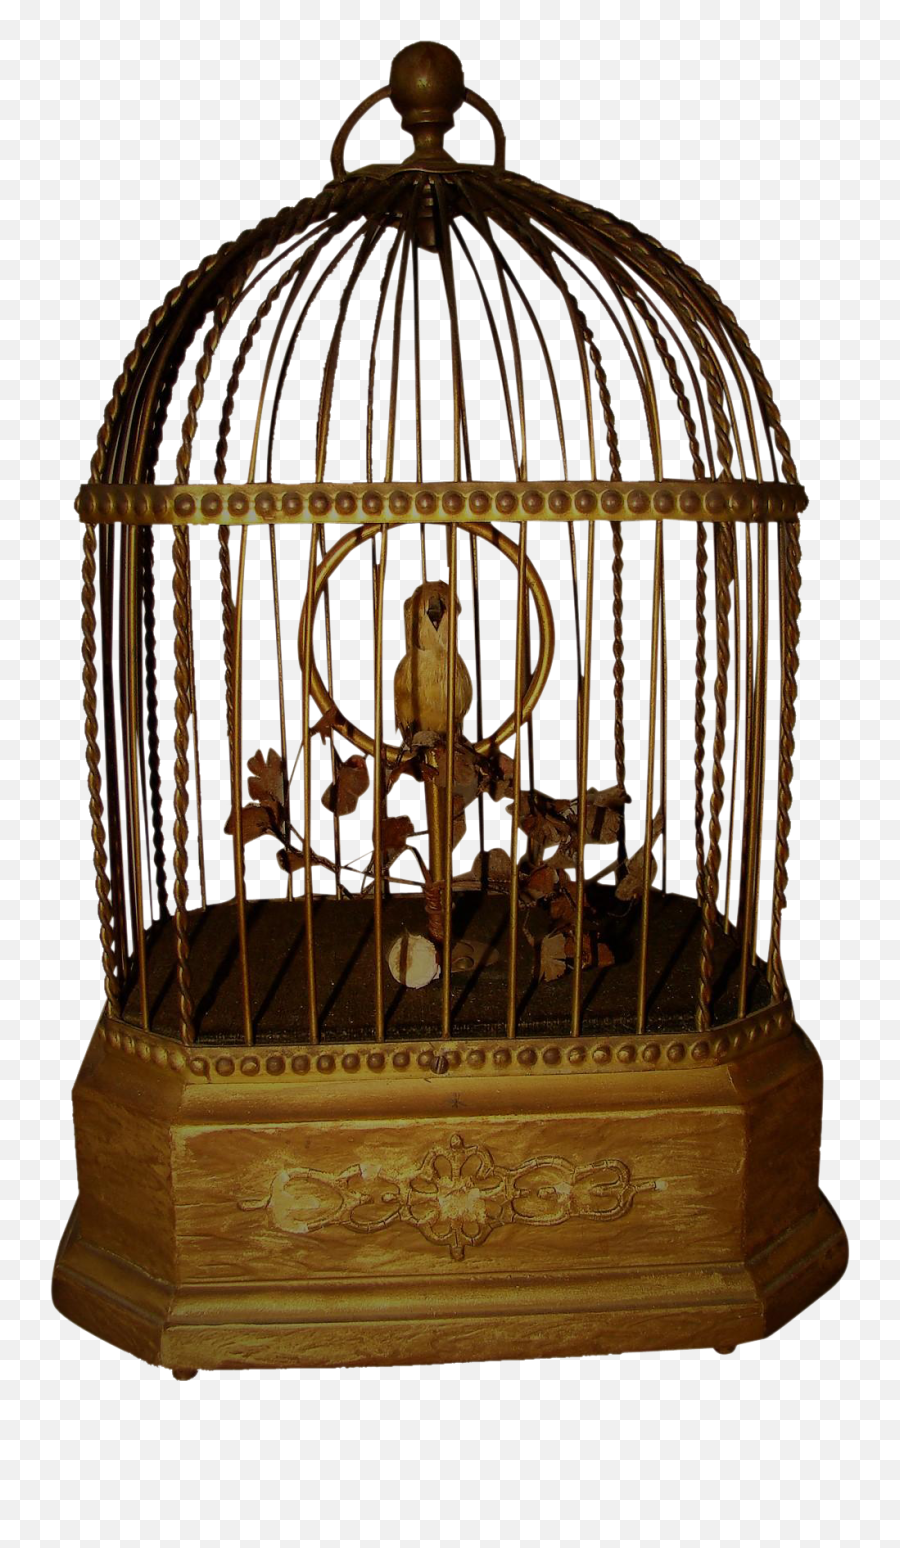 Antique Karl Griesbaum Singing Bird In Cage Automaton Music - Musical Bird On Cage Emoji,Box Game Robot With Emotions